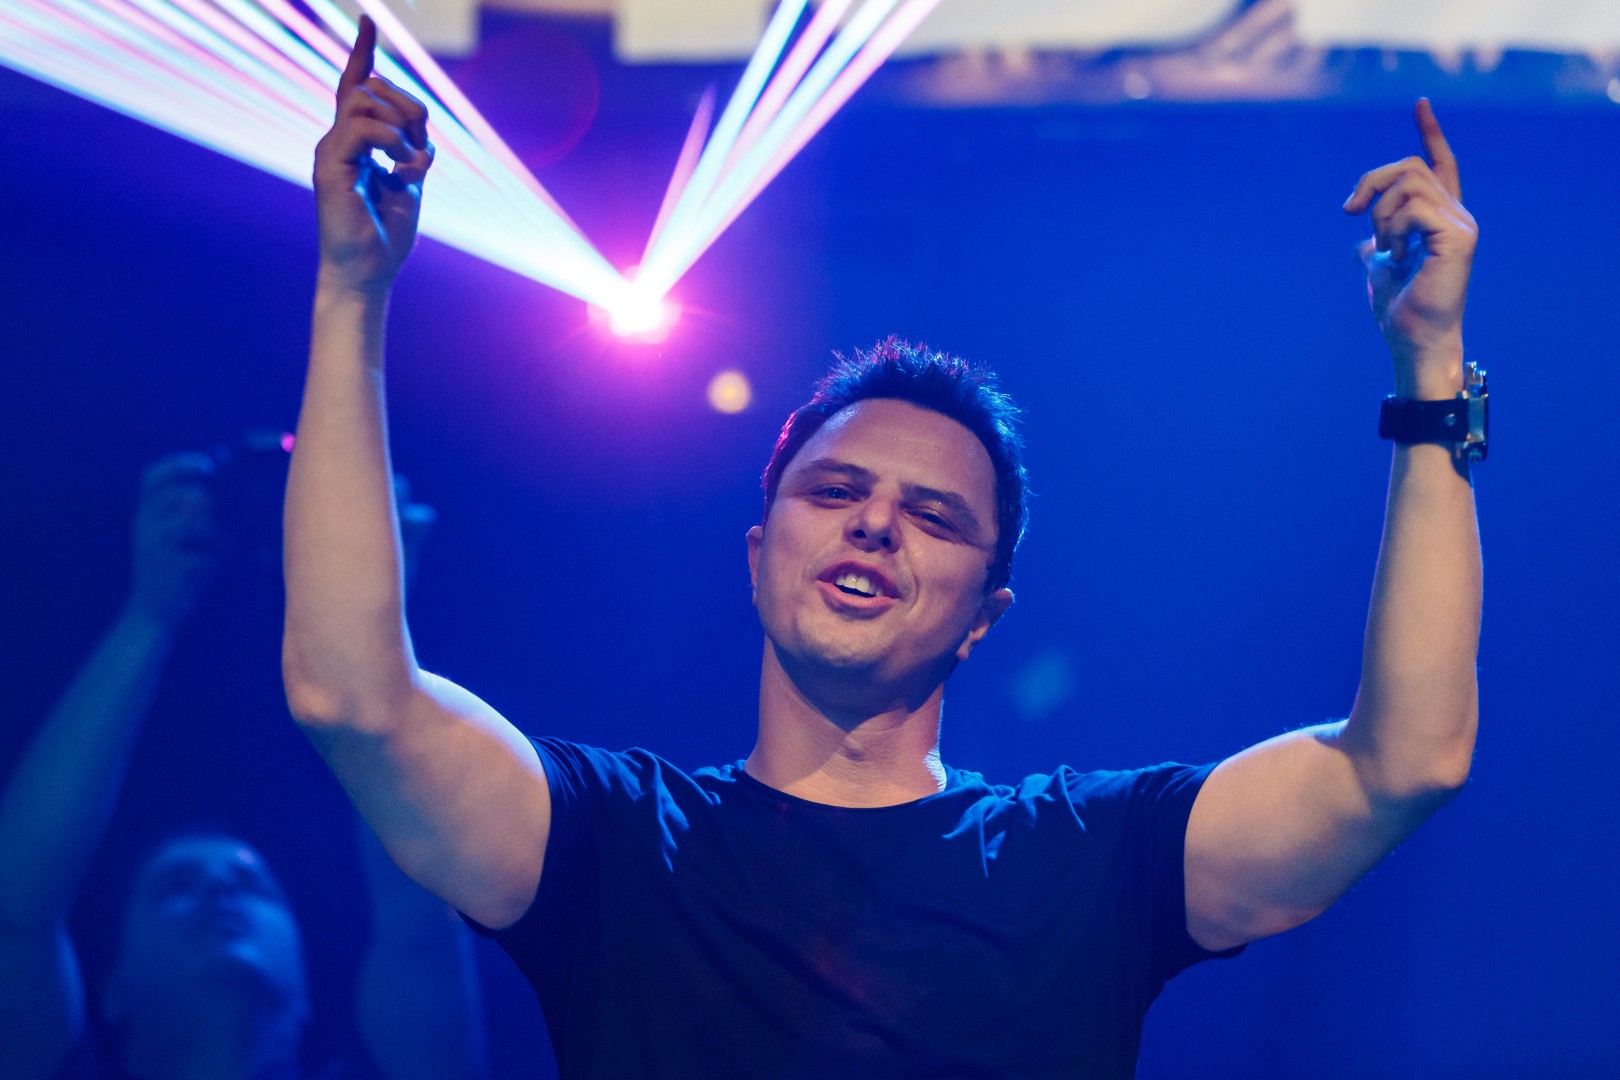 Markus Schulz at Arenele Romane in Bucharest on February 8, 2015 (332ff5fd50)